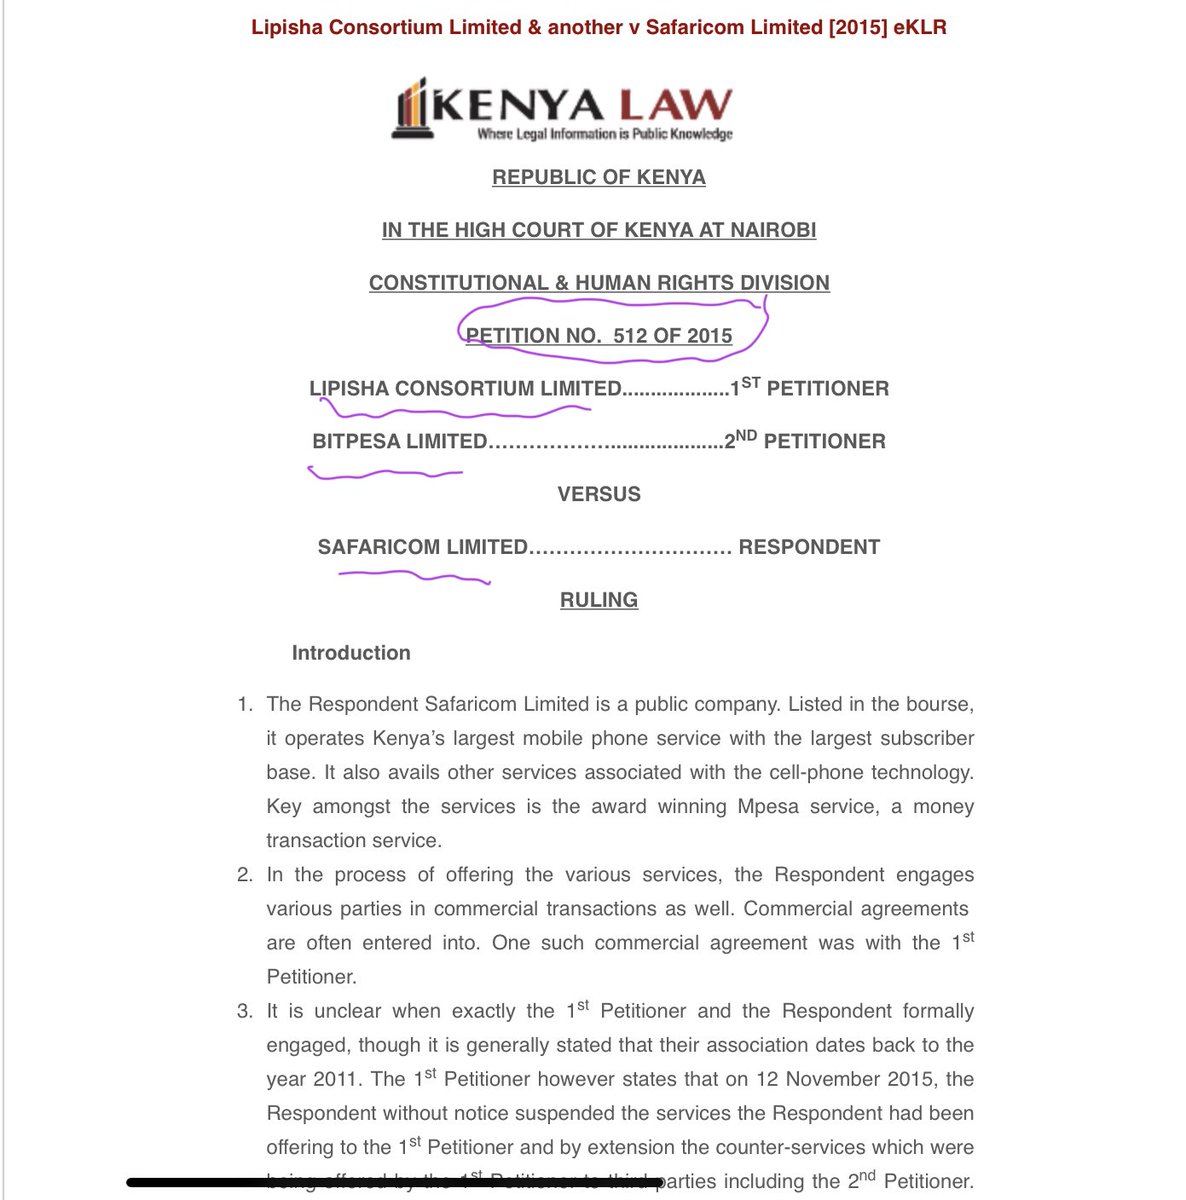 It all seemed coordinated.No access to bank account and Mpesa gateway services crippled Bitpesa business. Bitpesa and Lipisha (payment gateway partner) took the matter to courtPetition NO. 512 of 215  http://kenyalaw.org/caselaw/cases/view/117270/